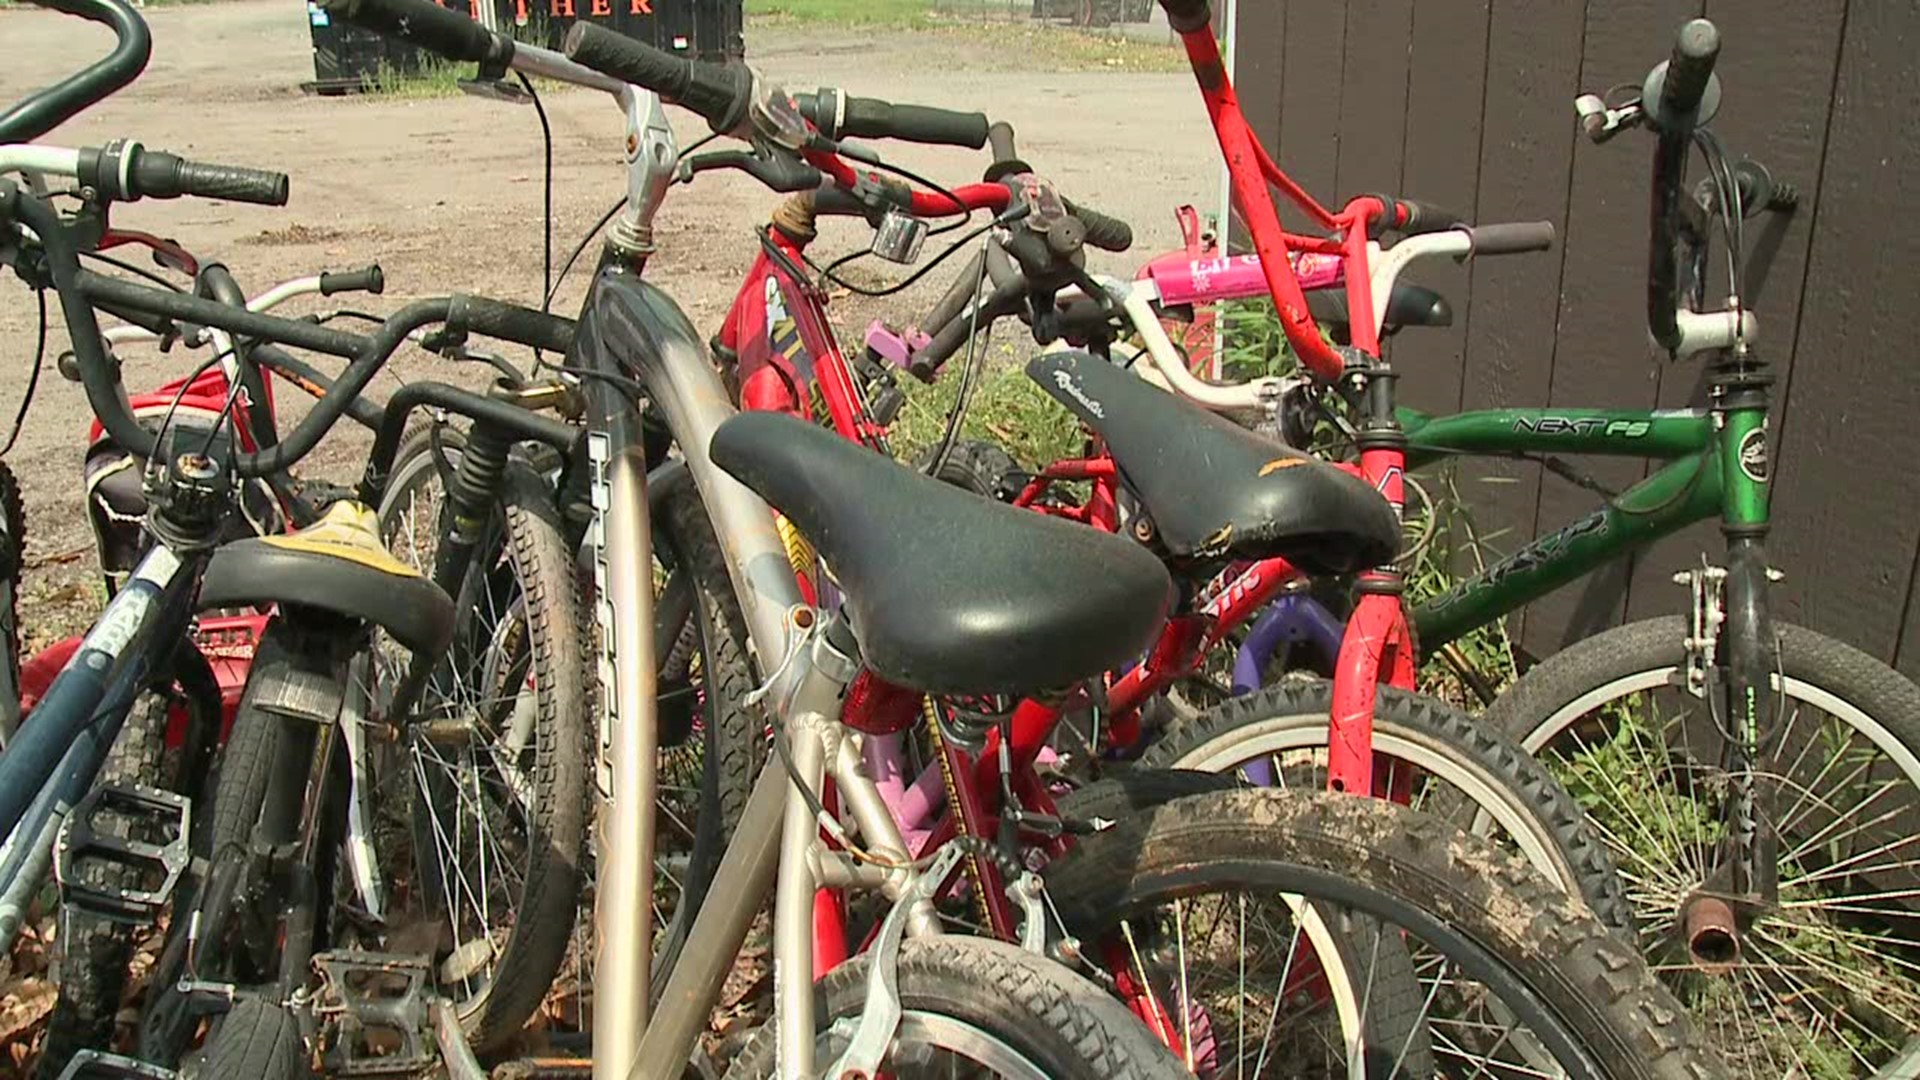 Some unwanted bikes are now in the hands of a nonprofit organization that will use them to give back to children, but you'll have to earn those wheels.